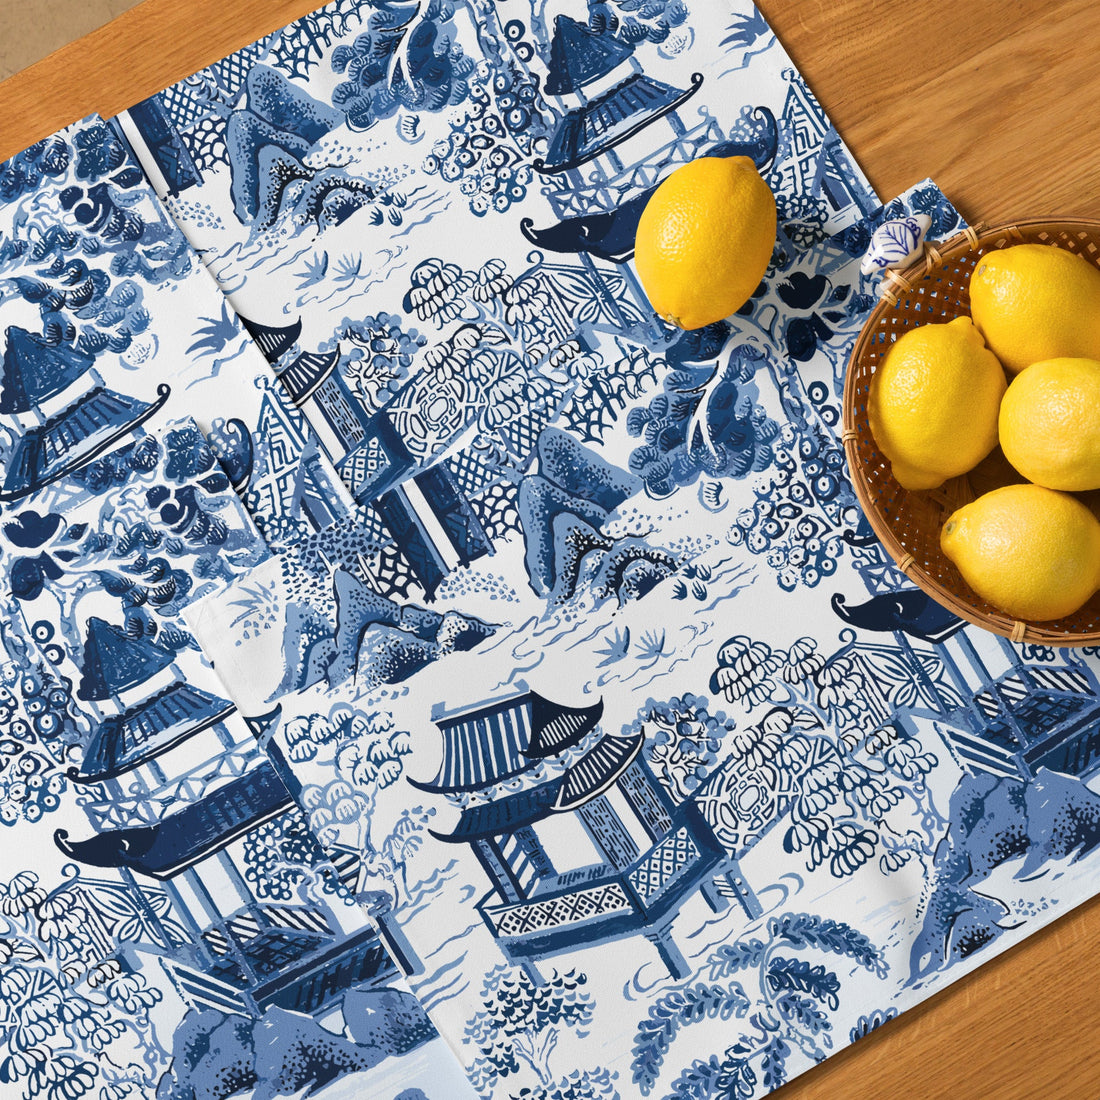 Kate McEnroe New York Chinoiserie Blue and White Placemats Set of 4, Traditional Asian Pagodas and Cherry Blossoms Porcelain Design Table Mats Placemats 8697237_17484